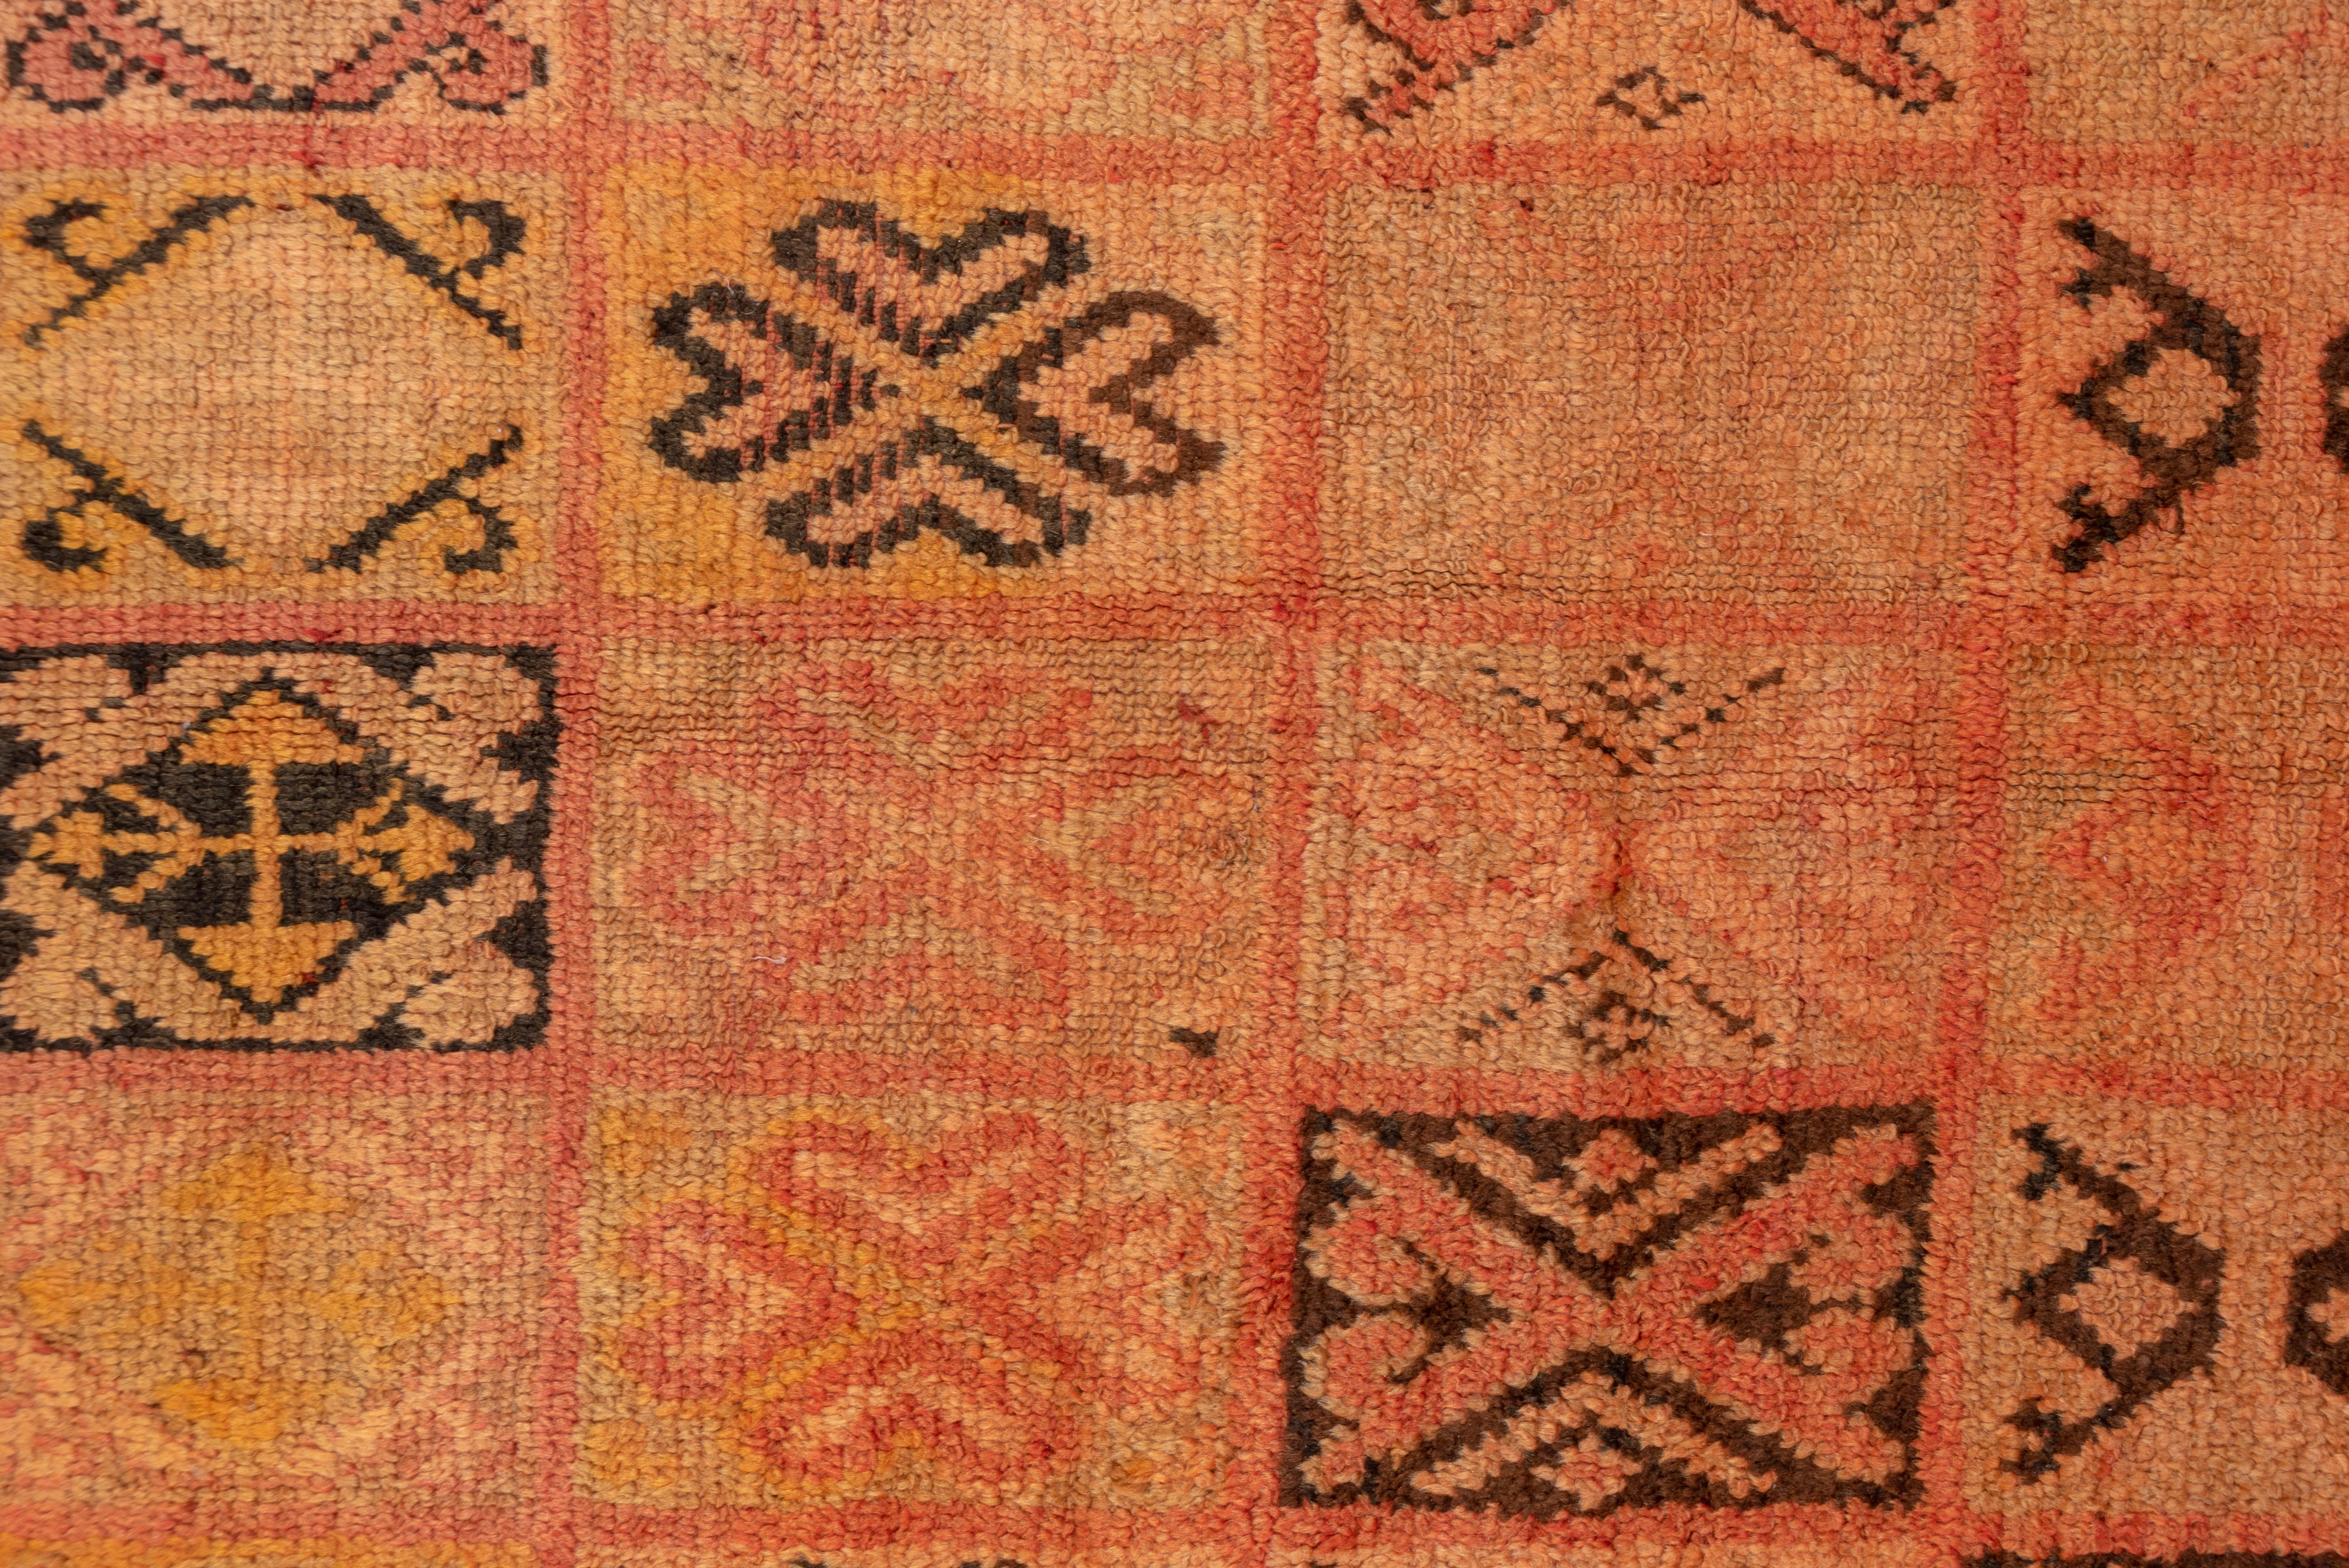 Tribal X Pattern Moroccan Rug in Fall Orange Tones For Sale 1